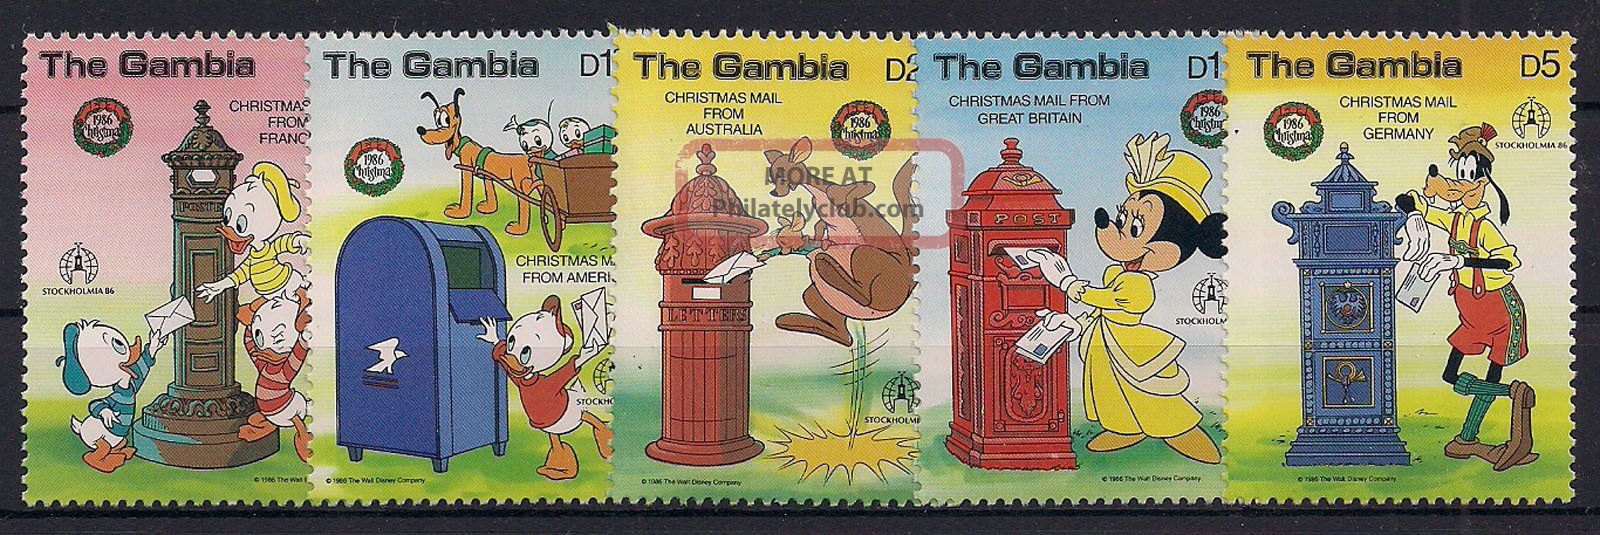 Gambia 1986 - Walt Disney - - Vf 613 - 7 Topical Stamps photo